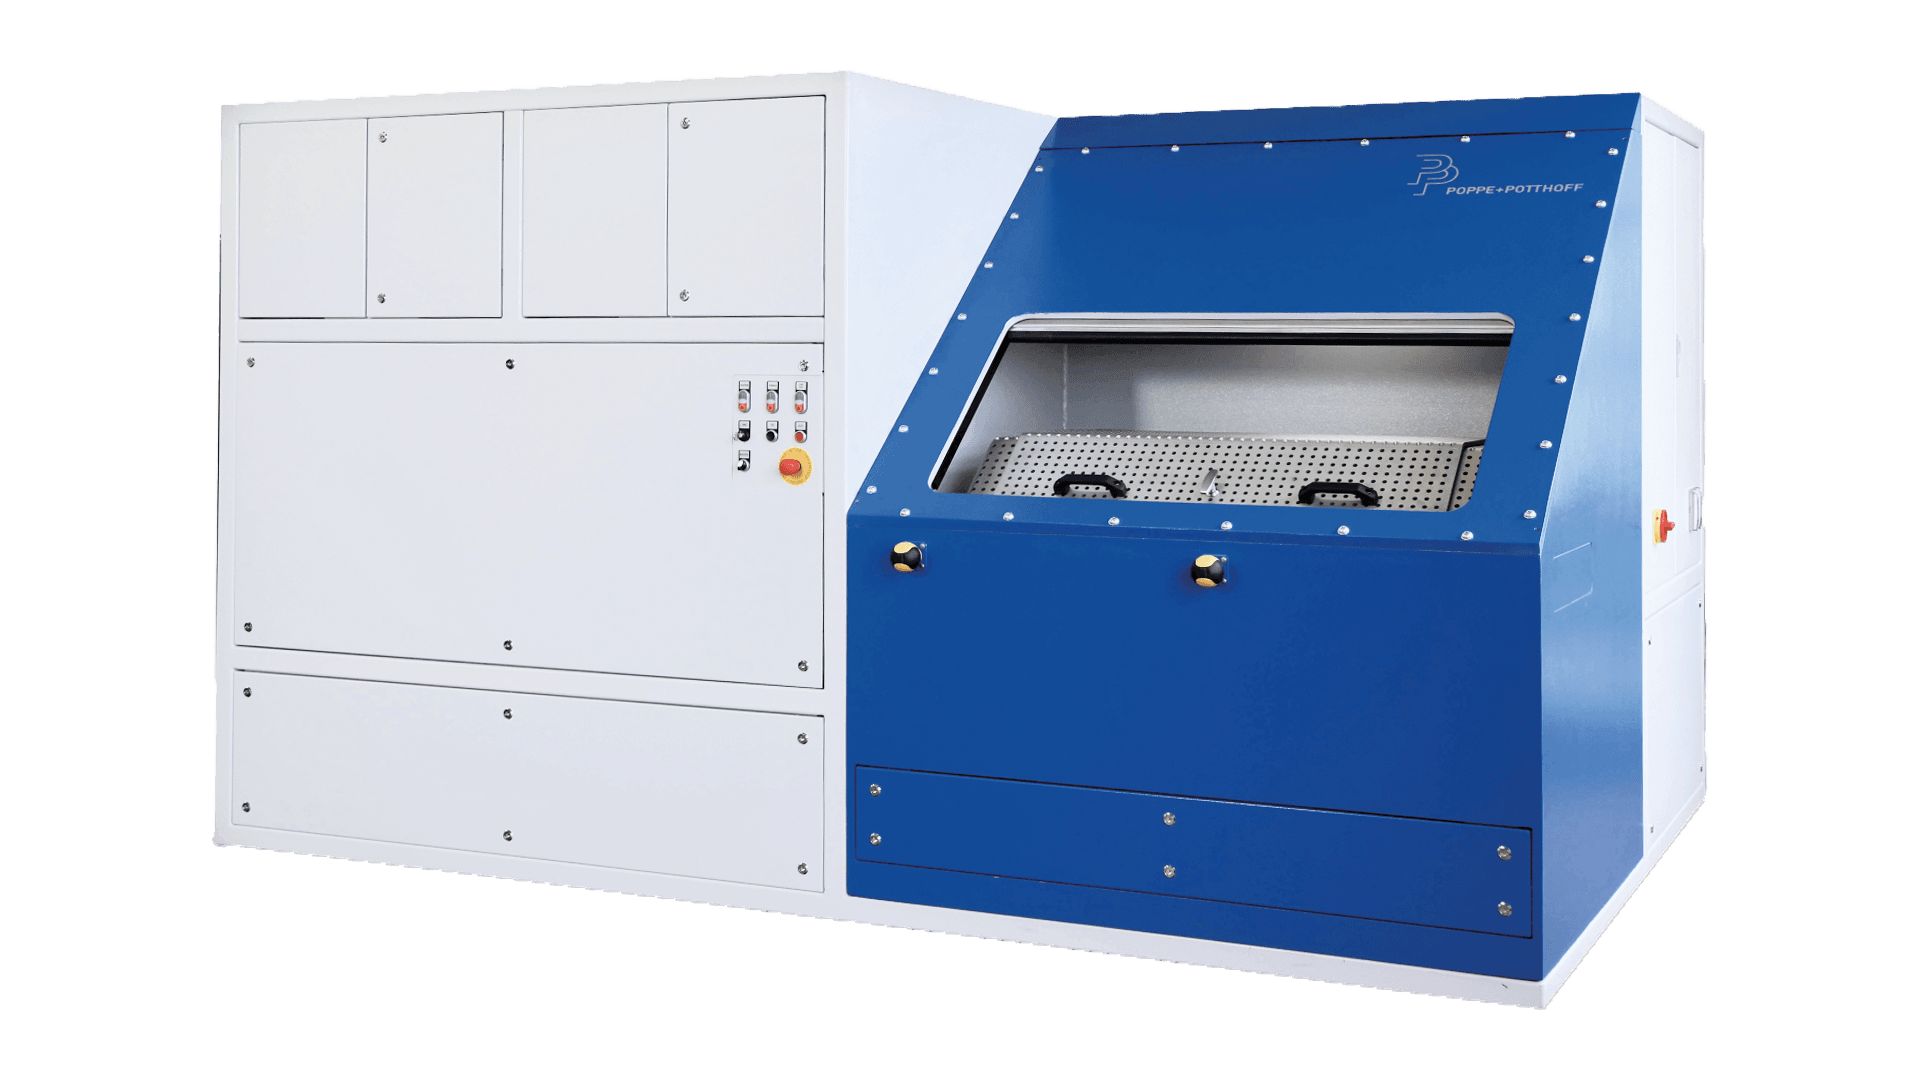 pressure cyle test stand with blue security test chamber by Poppe + Potthoff Maschinenbau